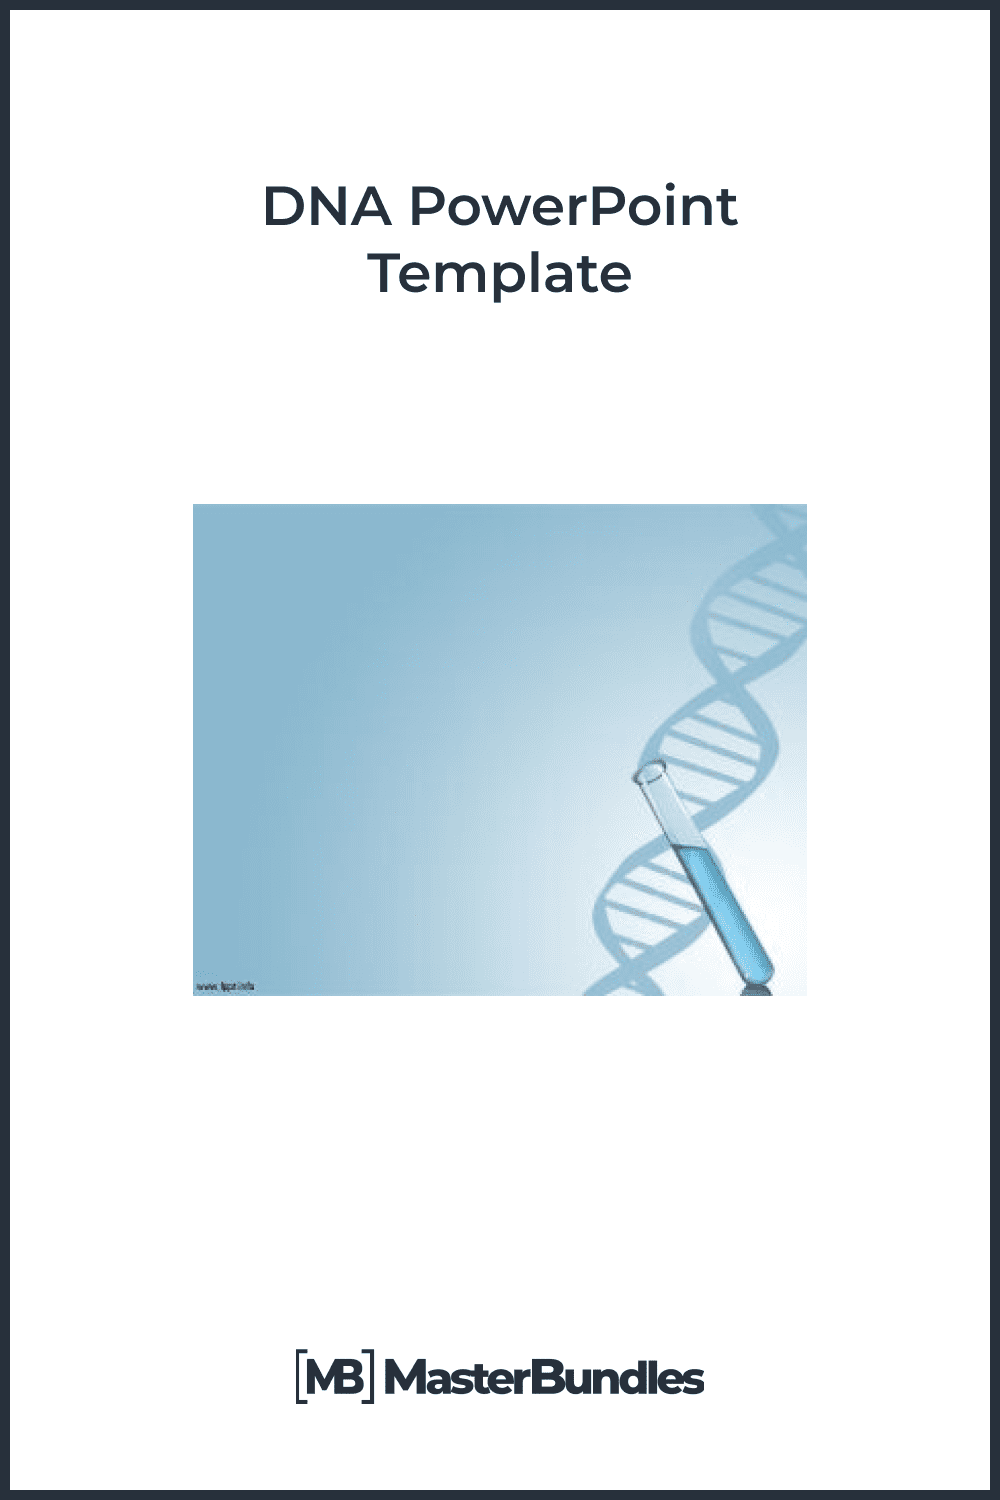 DNA powerpoint template.